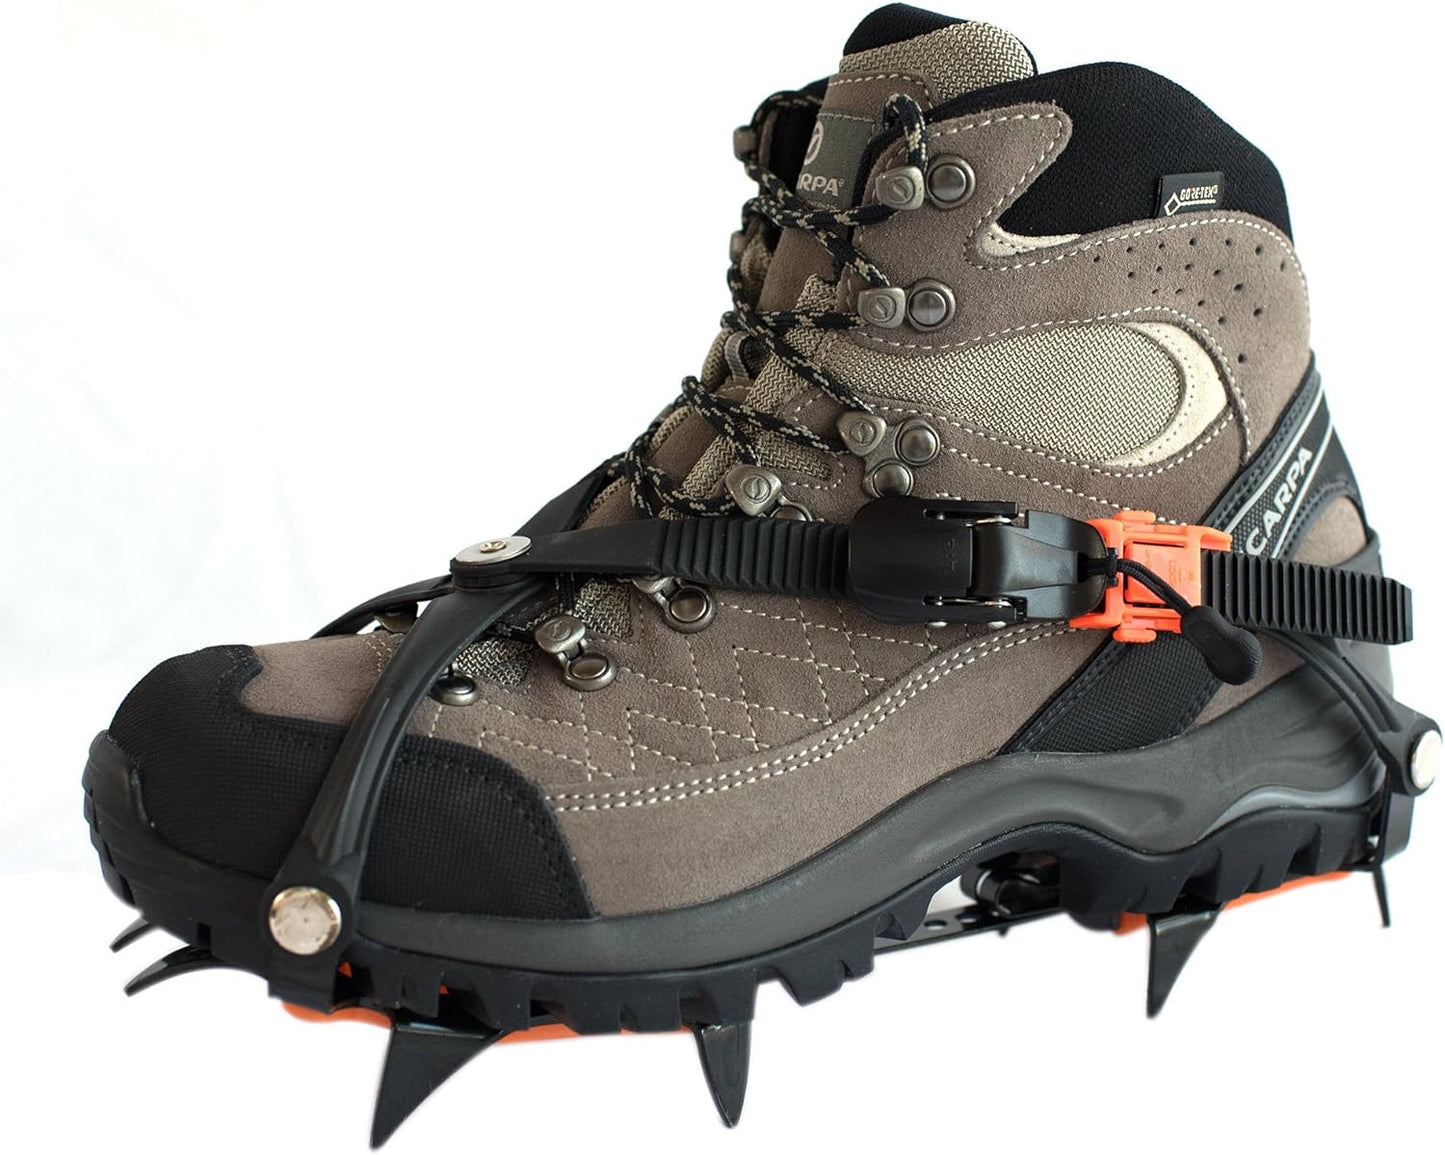 Hillsound Trail Crampon Pro I Ice Cleat Traction System for Off Trail & Backcountry Hiking